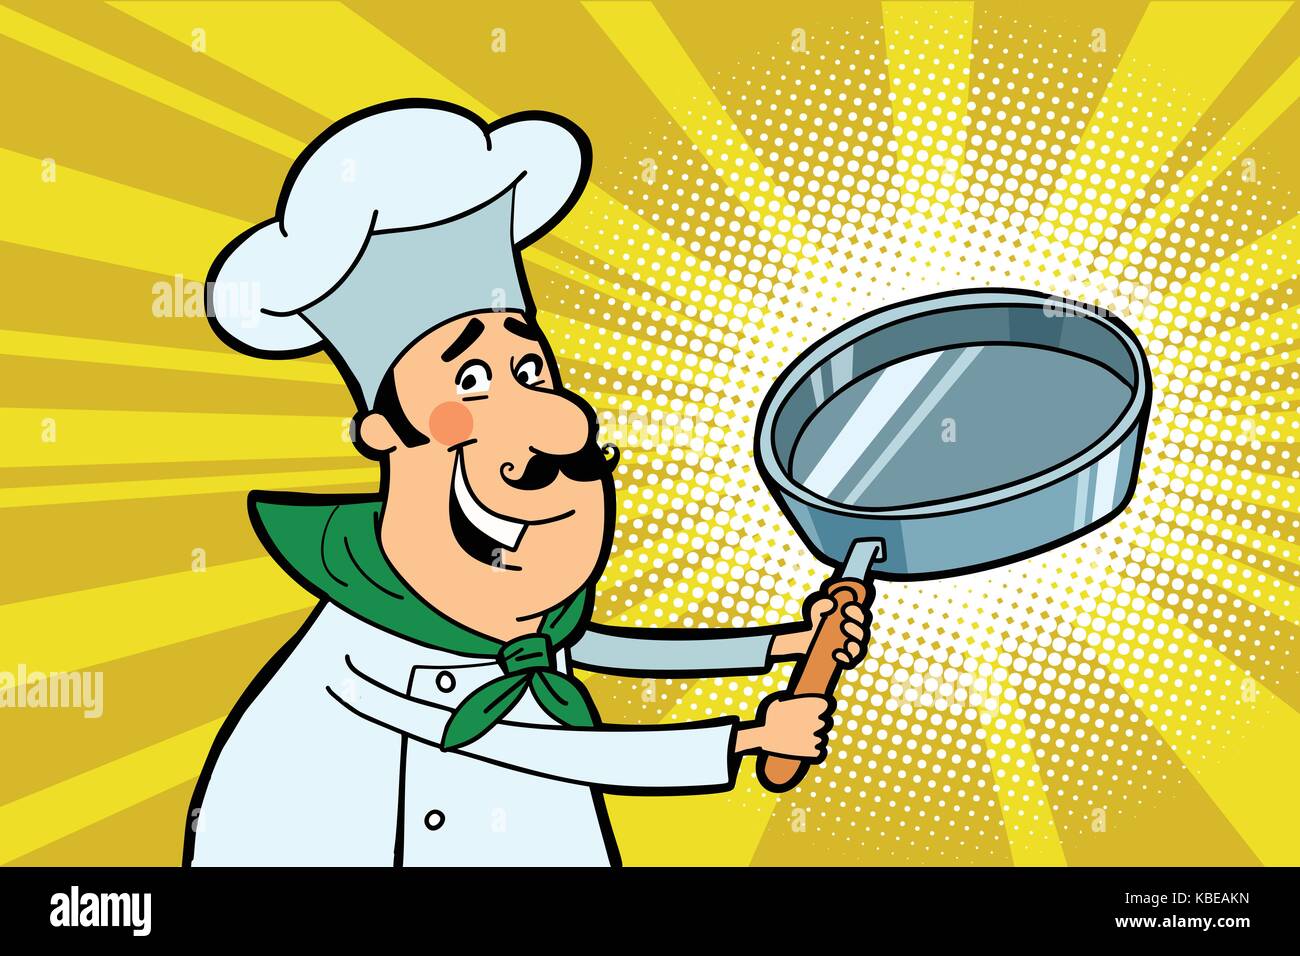 Chef cook character with a frying pan Stock Vector